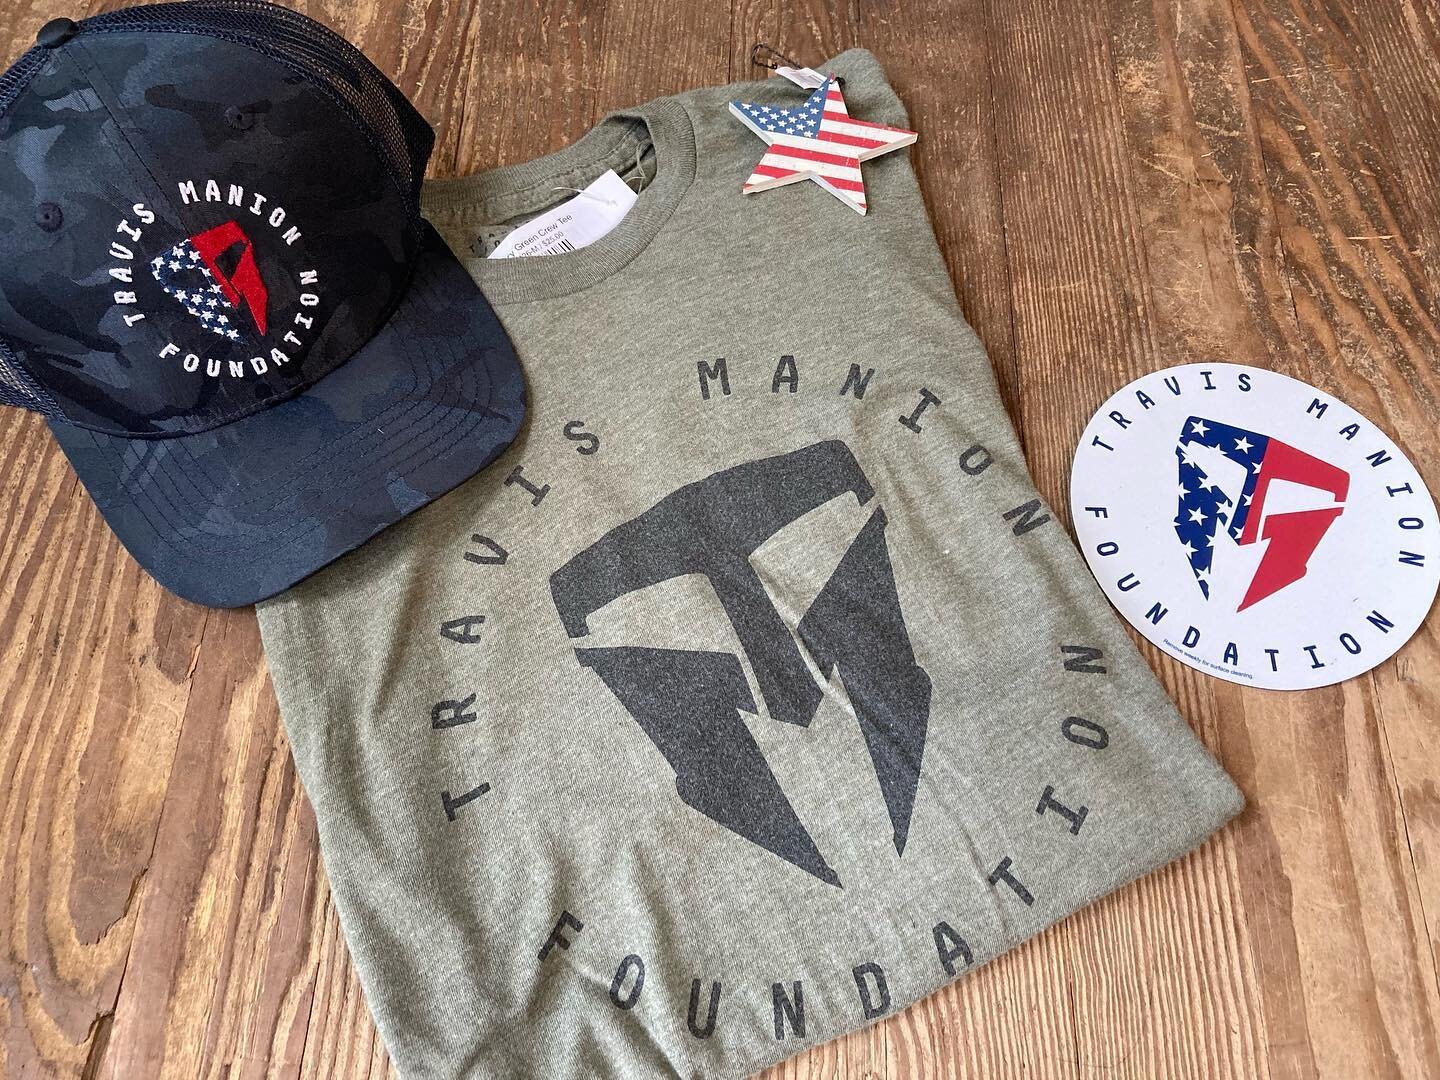 Gearing up for our Memorial Day tribute to our fallen heroes through Travis Manion Foundation.  20% of all apparel sales and 100% of all TMF gear sales goes to TMF.  Memorial Day - July 4th. 🇺🇸